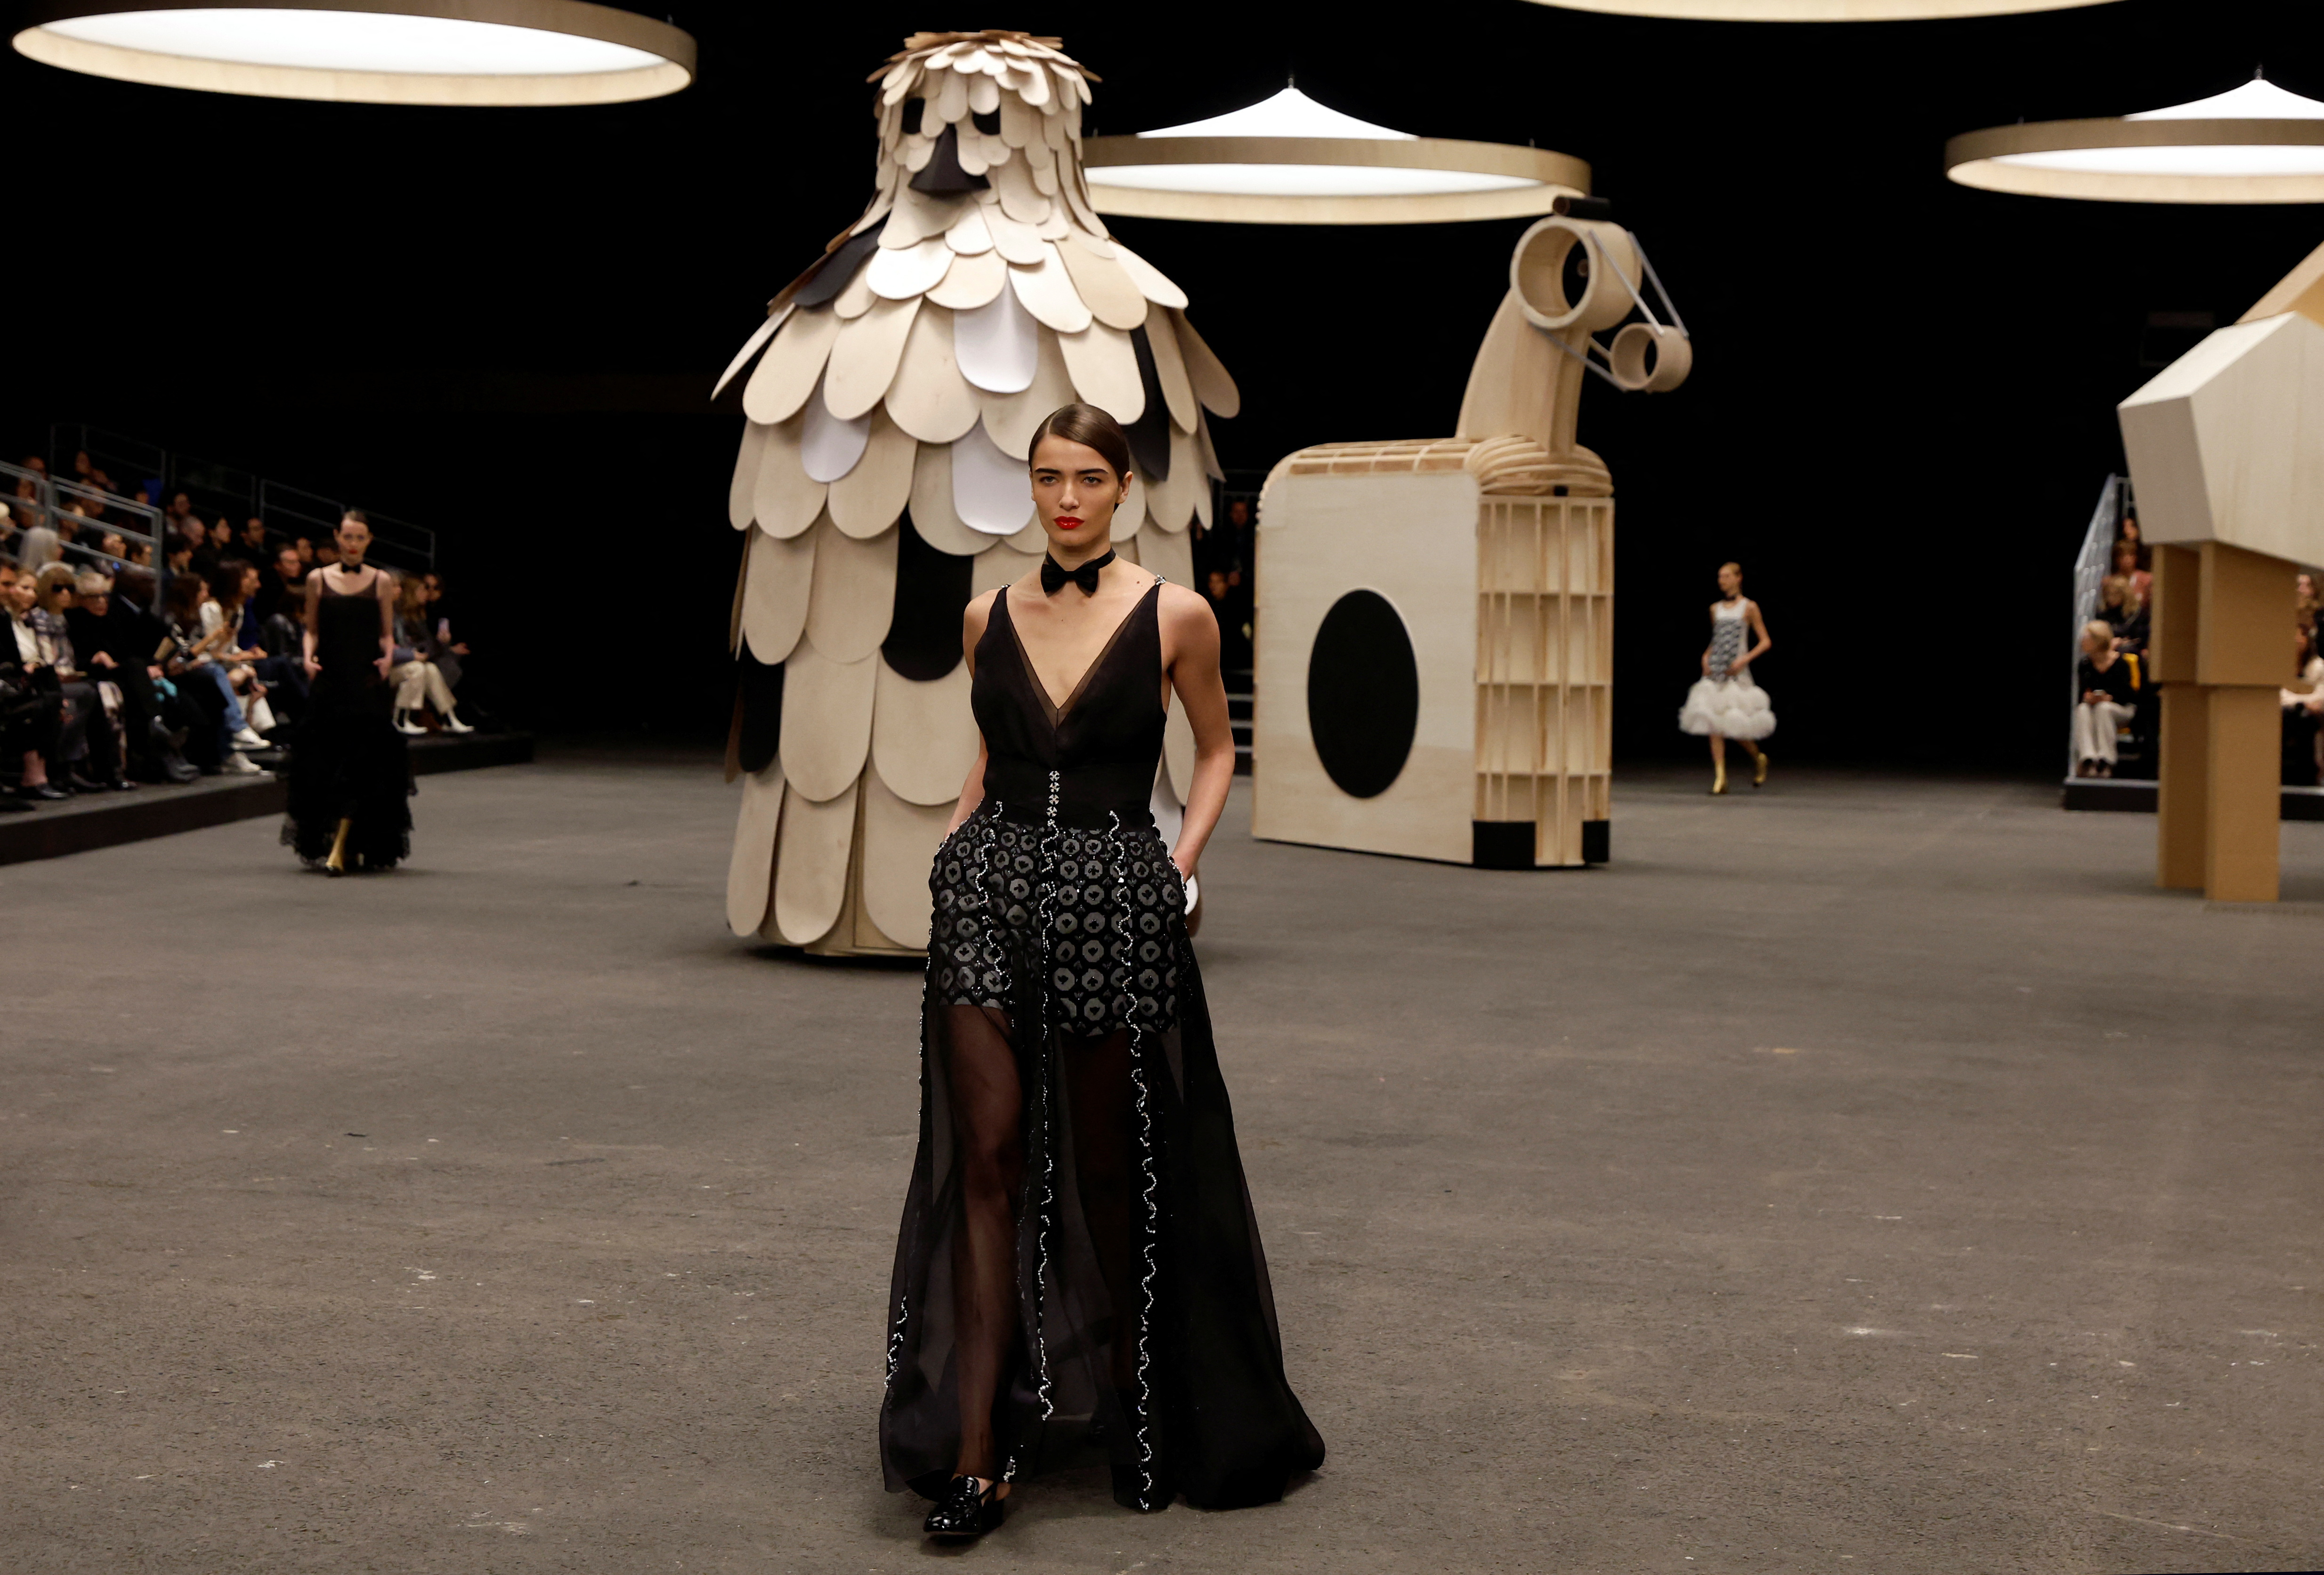 Chanel Spring/Summer Haute Couture collection stars in new Netflix